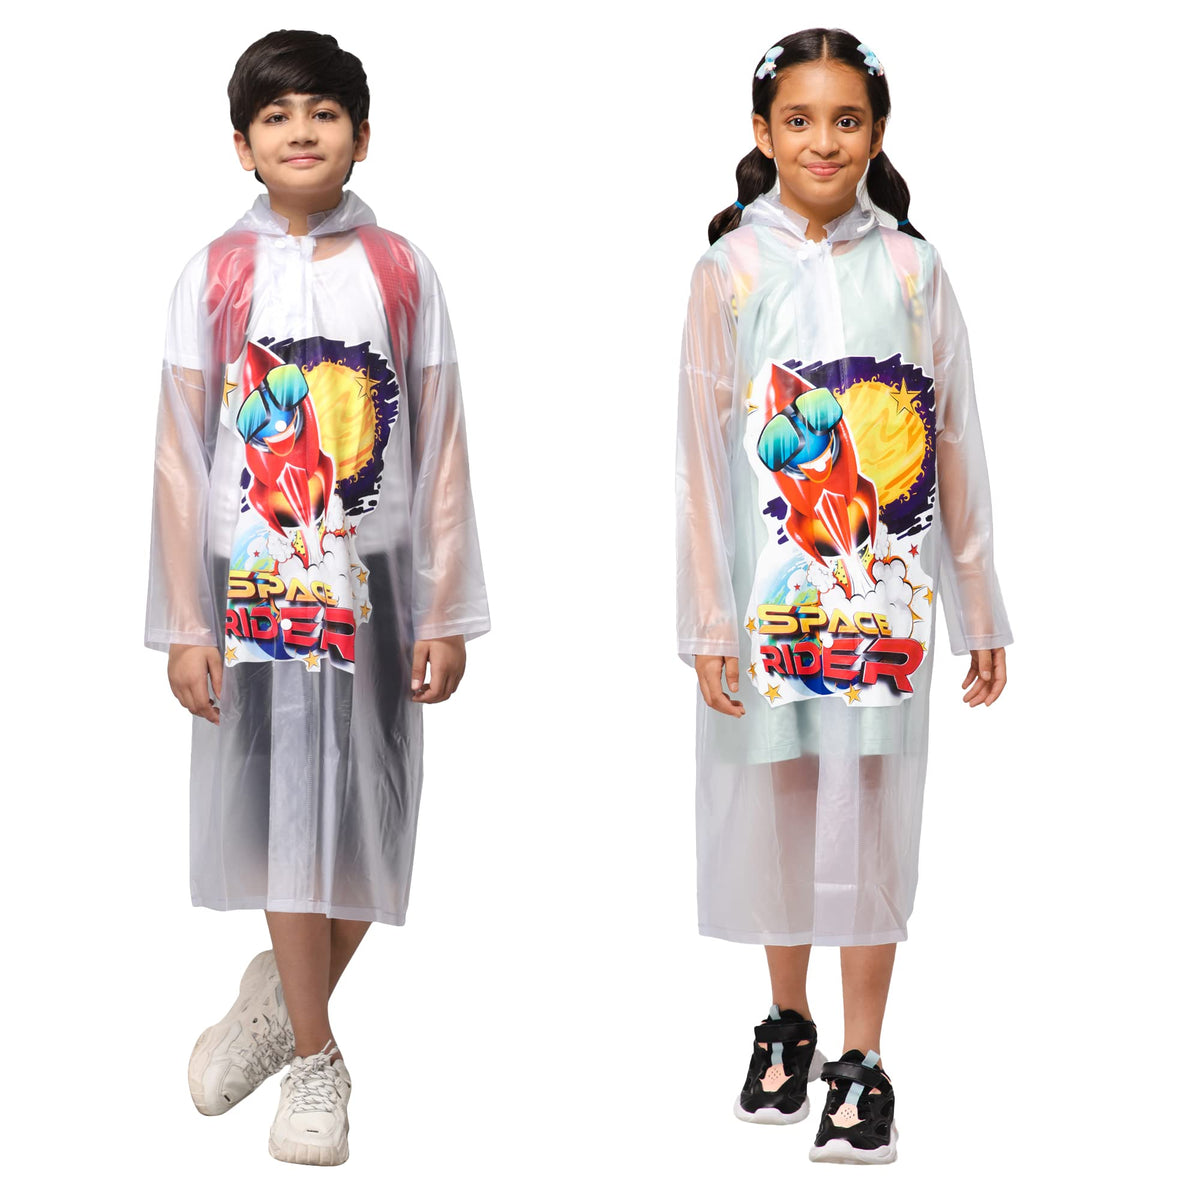 THE CLOWNFISH Toon Caper Series Kids Waterproof PVC Longcoat with Adjustable Hood & Extra Space for Backpack/Schoolbag Holding. Printed Plastic Pouch. Kid Age-3-4 years (Link White-Transparent)